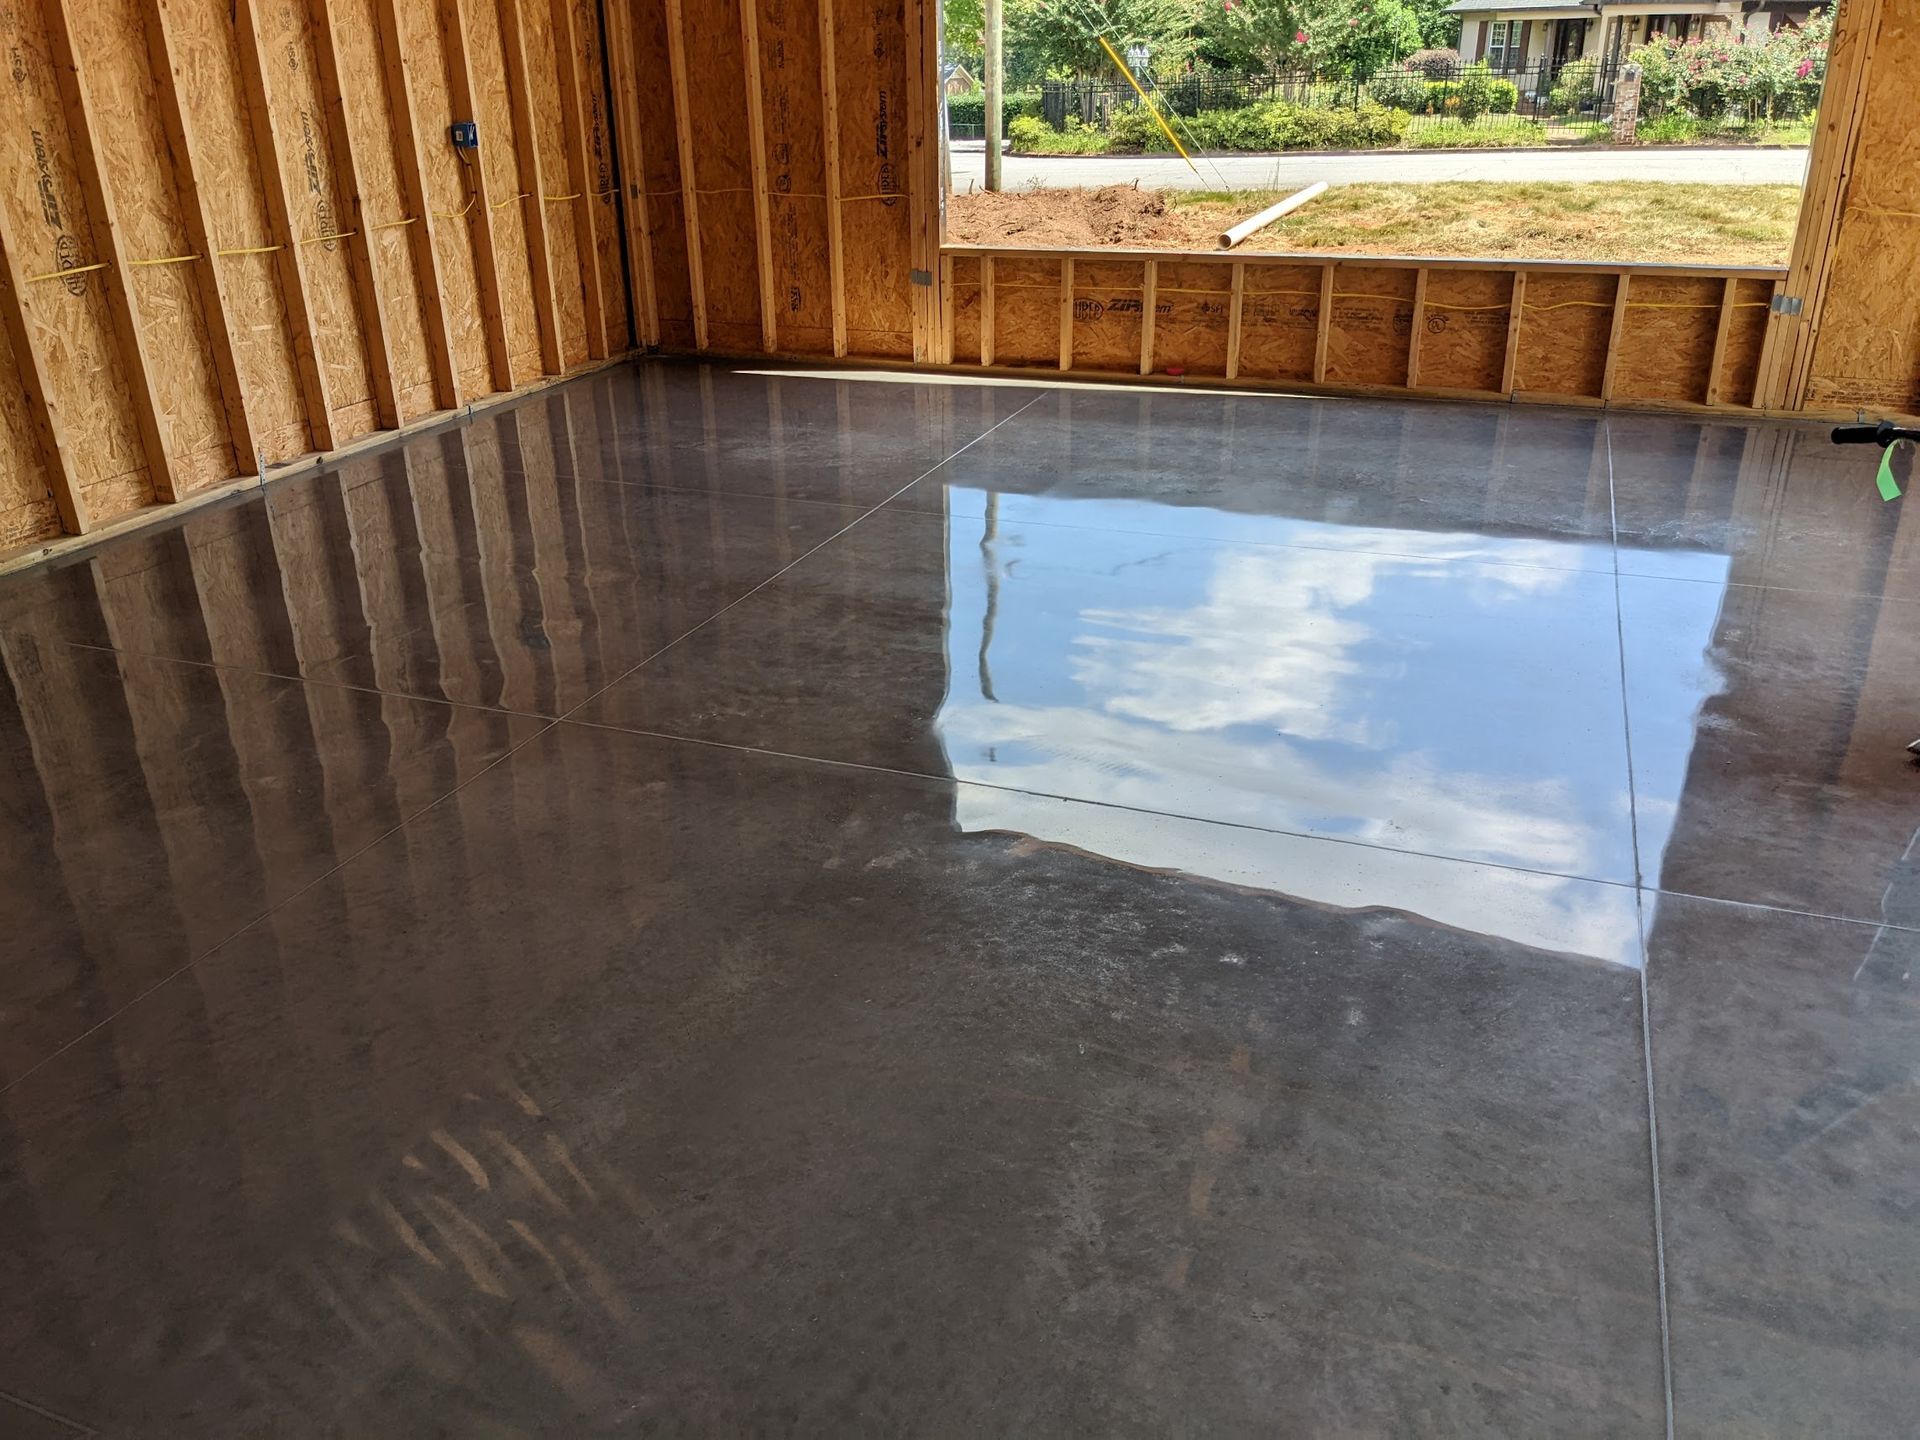 A shiny concrete floor in a room with a window.